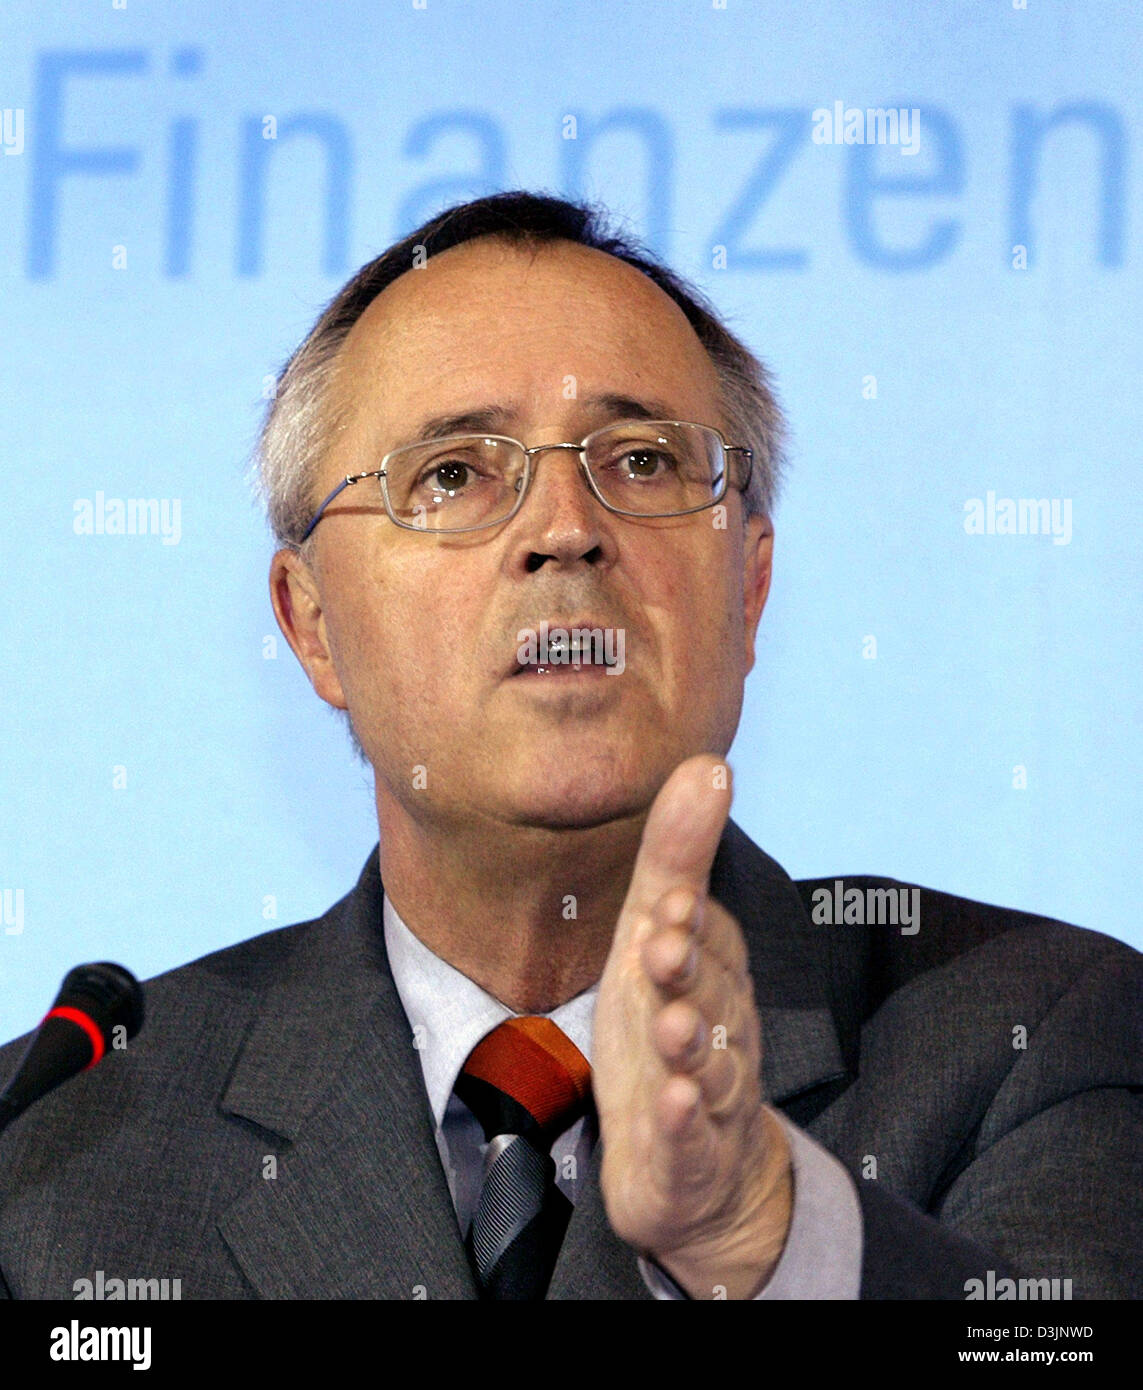 (dpa) - German Finance Minister Hans Eichel answers journalists' questions at the Federal Finance Ministry in Berlin, Germany, 21 February 2005. The politician explained during a press conference that illicit work in Germany is still decreasing. Eichel attributed the decrease to tighter customs inspections as well as reforms by the German government. Stock Photo